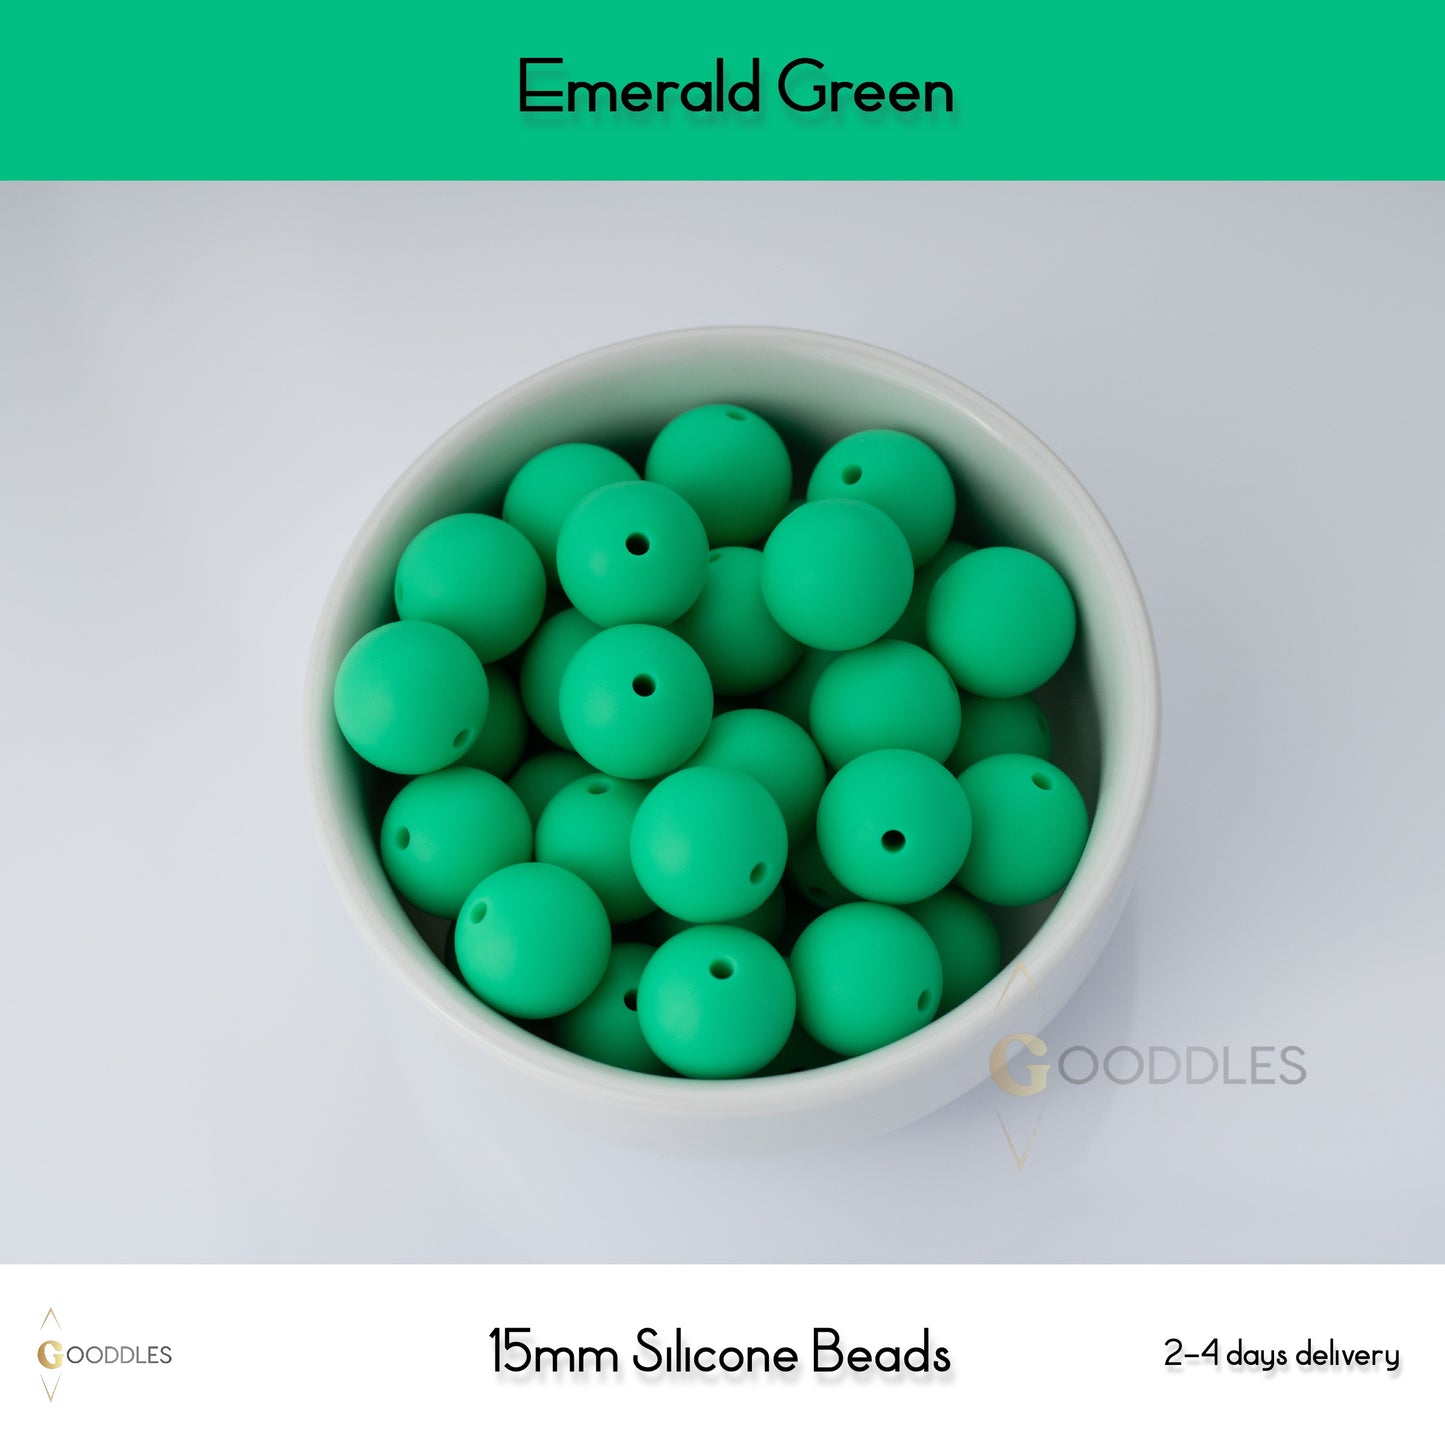 5pcs, Emerald Green Silicone Beads Round Silicone Beads